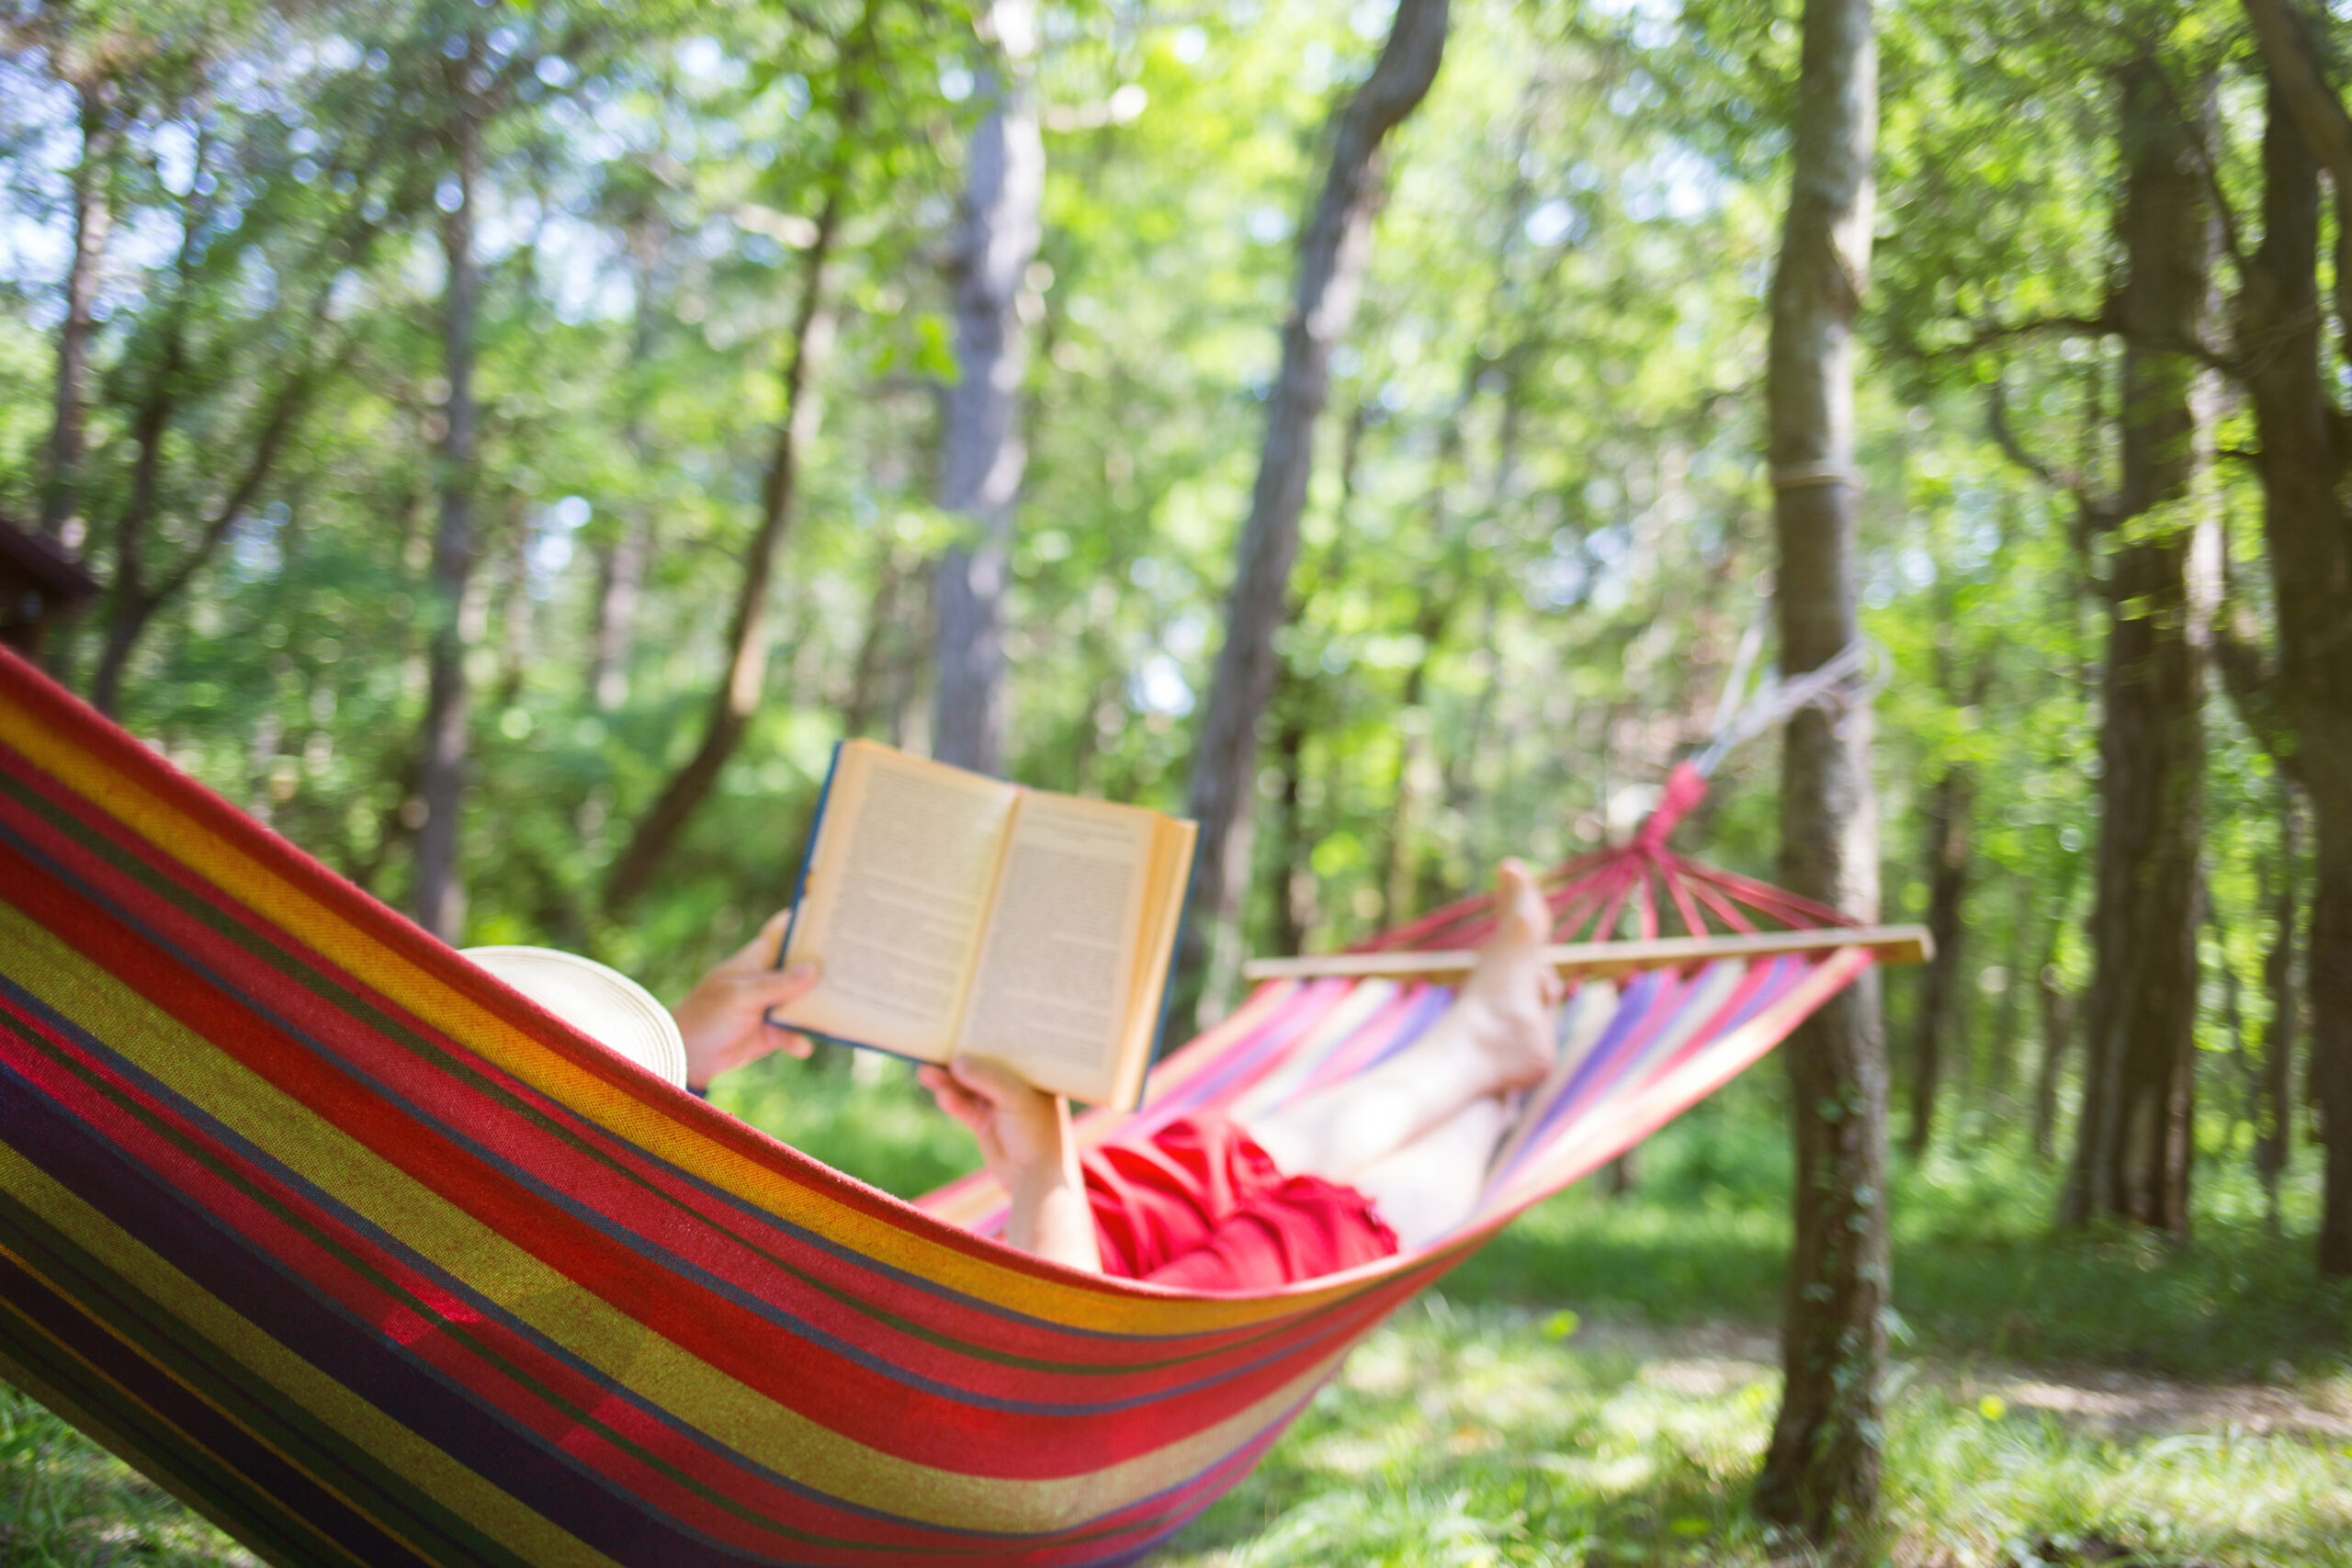 Photo of a white woman reading a book in a red and yellow striped hammock, surrounded by trees.